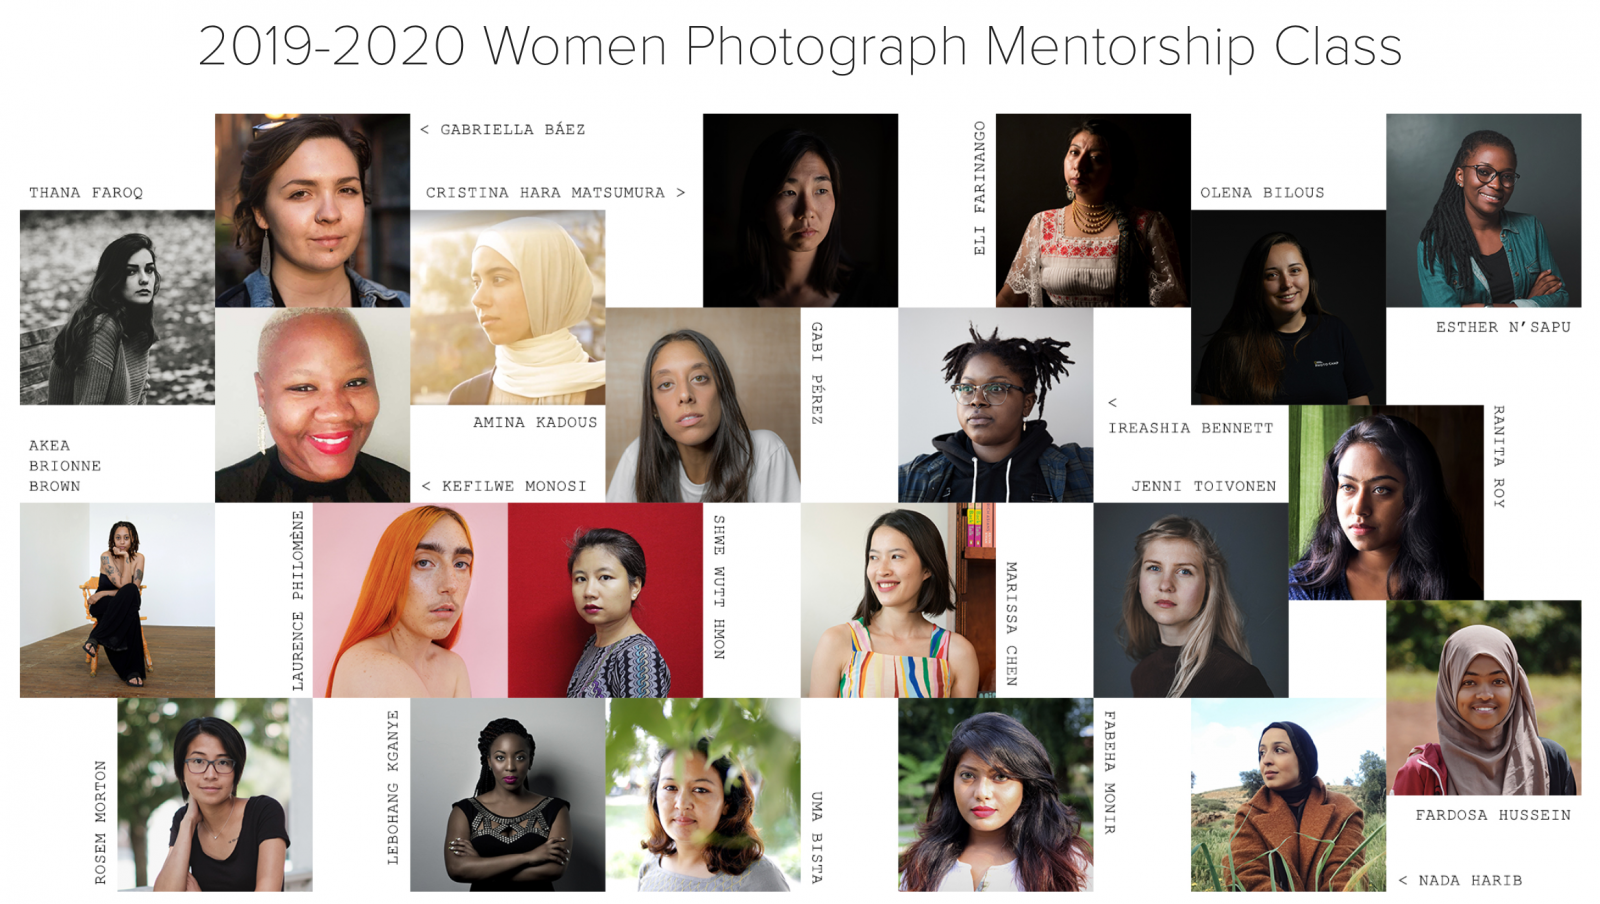 Excited to join the Women Photograph Mentorship Class 2019-2020! 